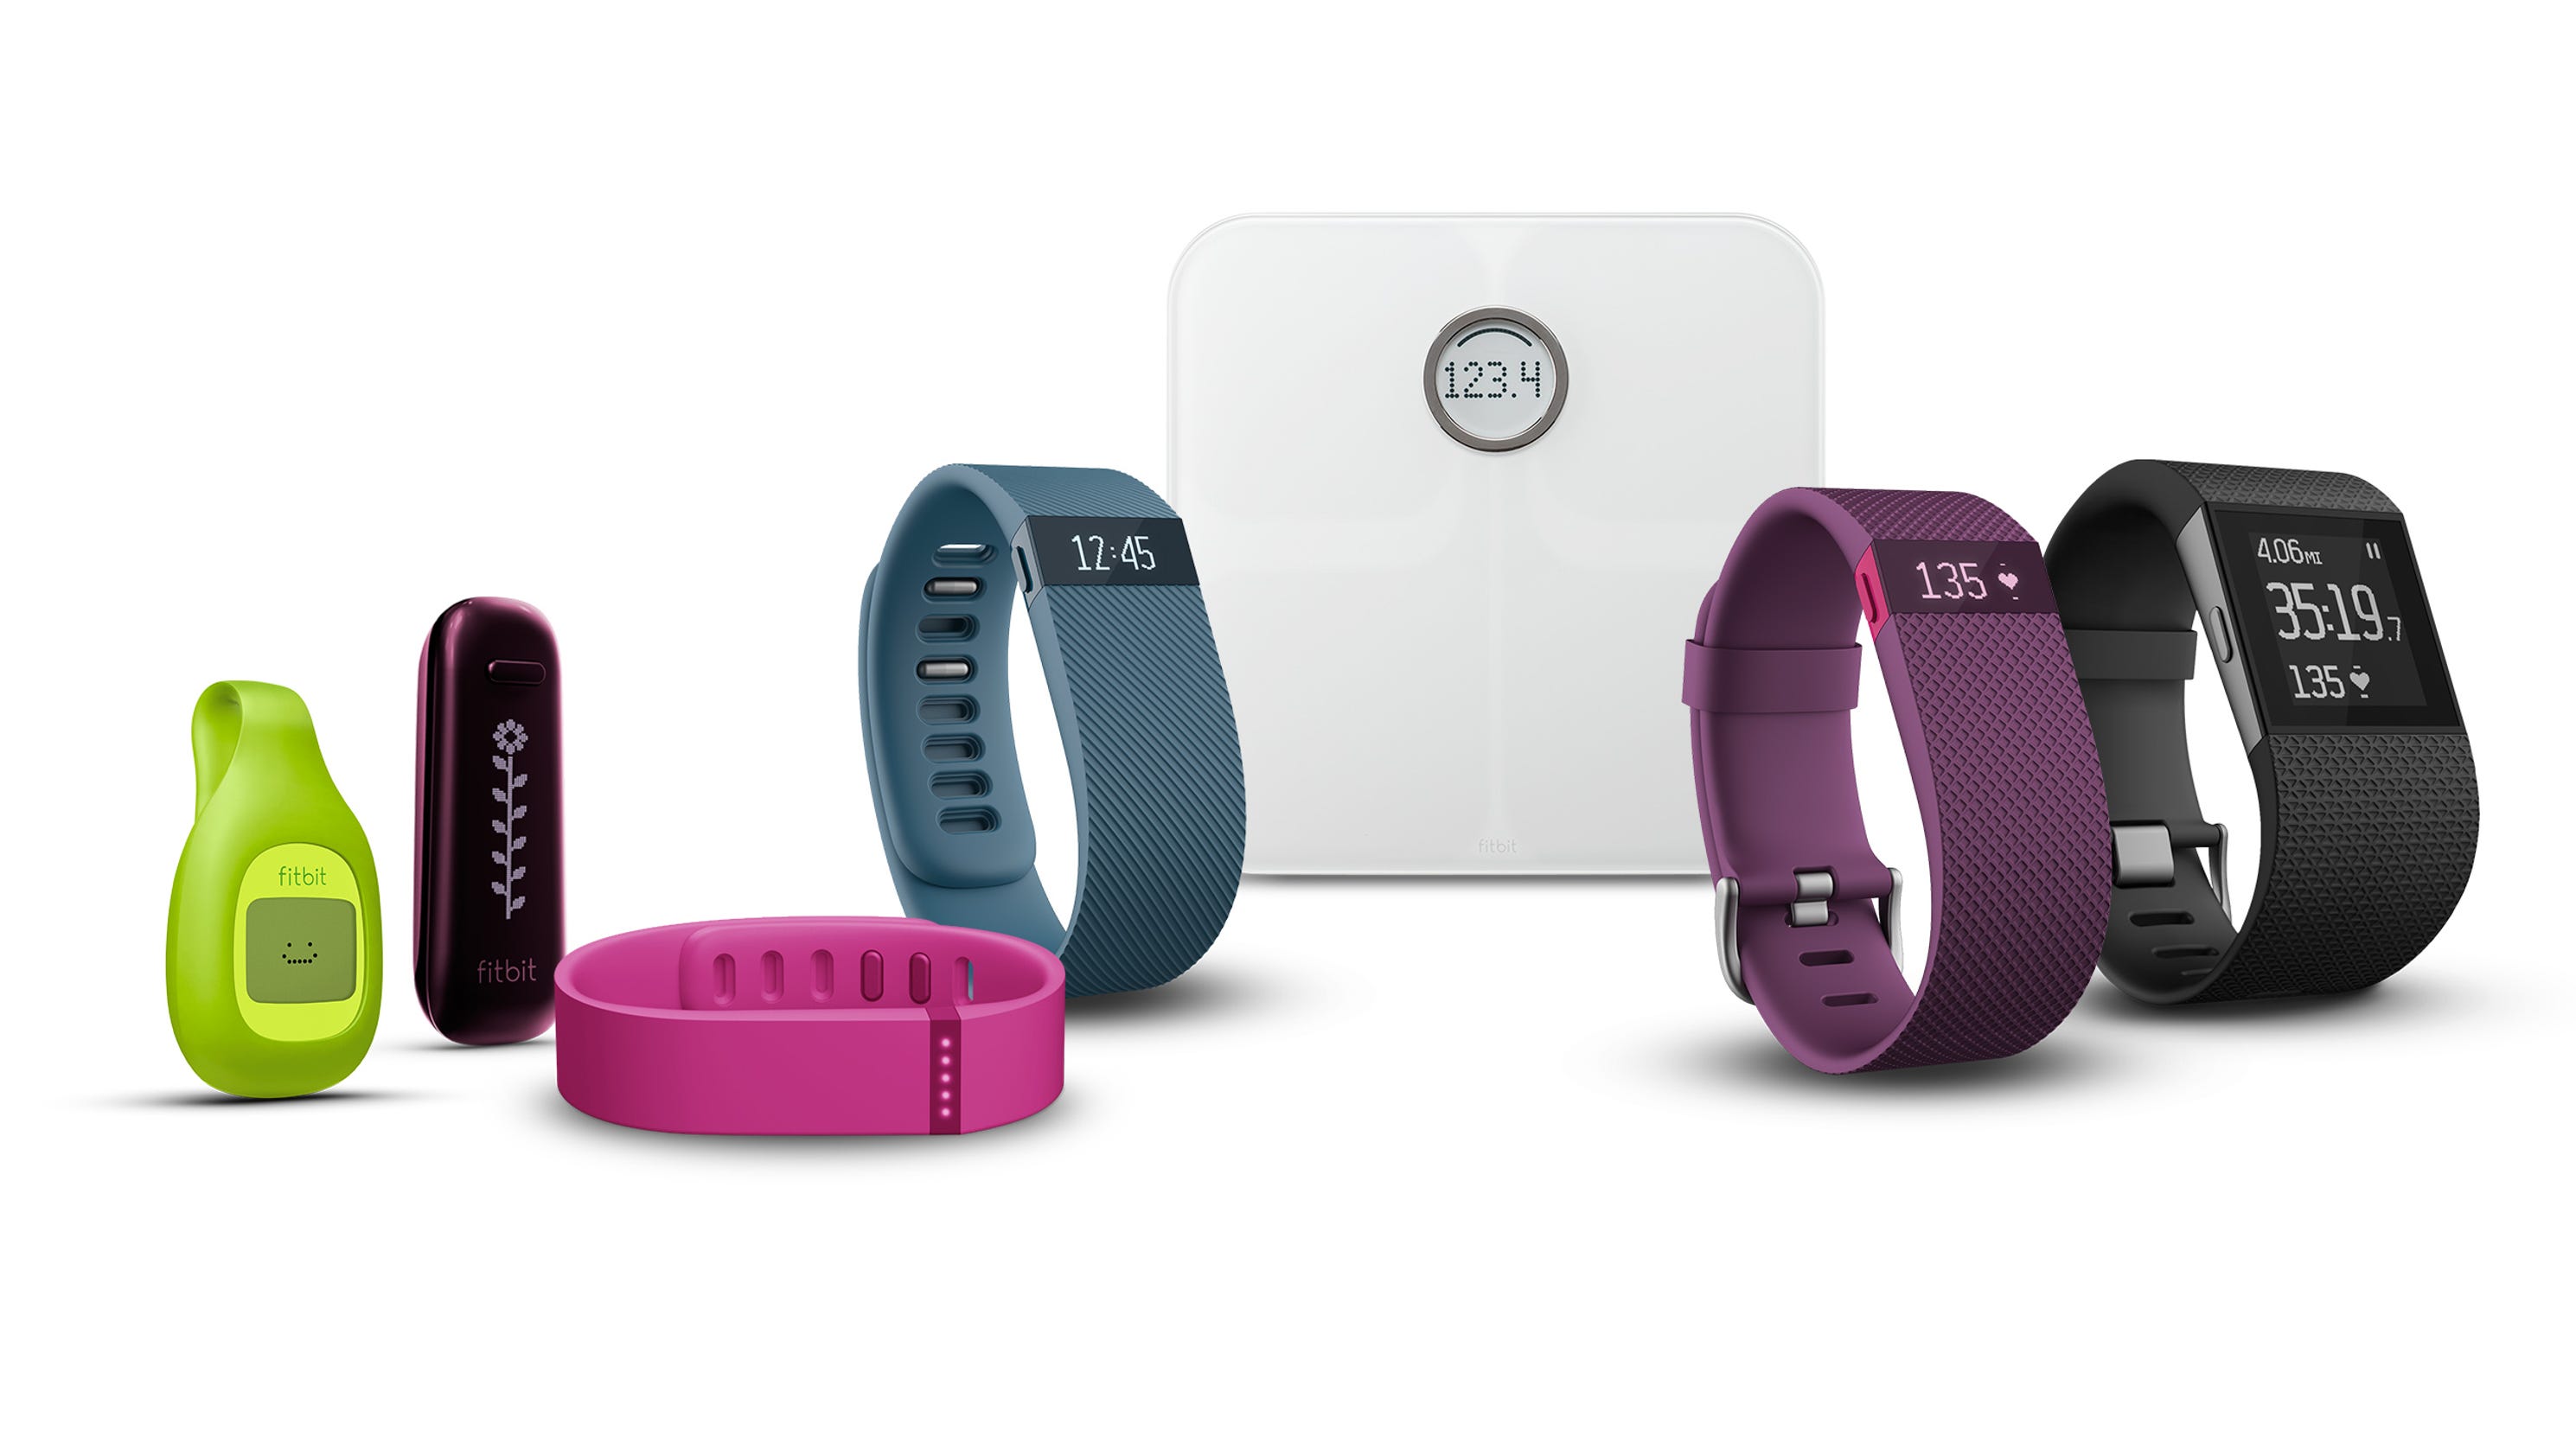 Hottest fitness trackers unveiled this fall